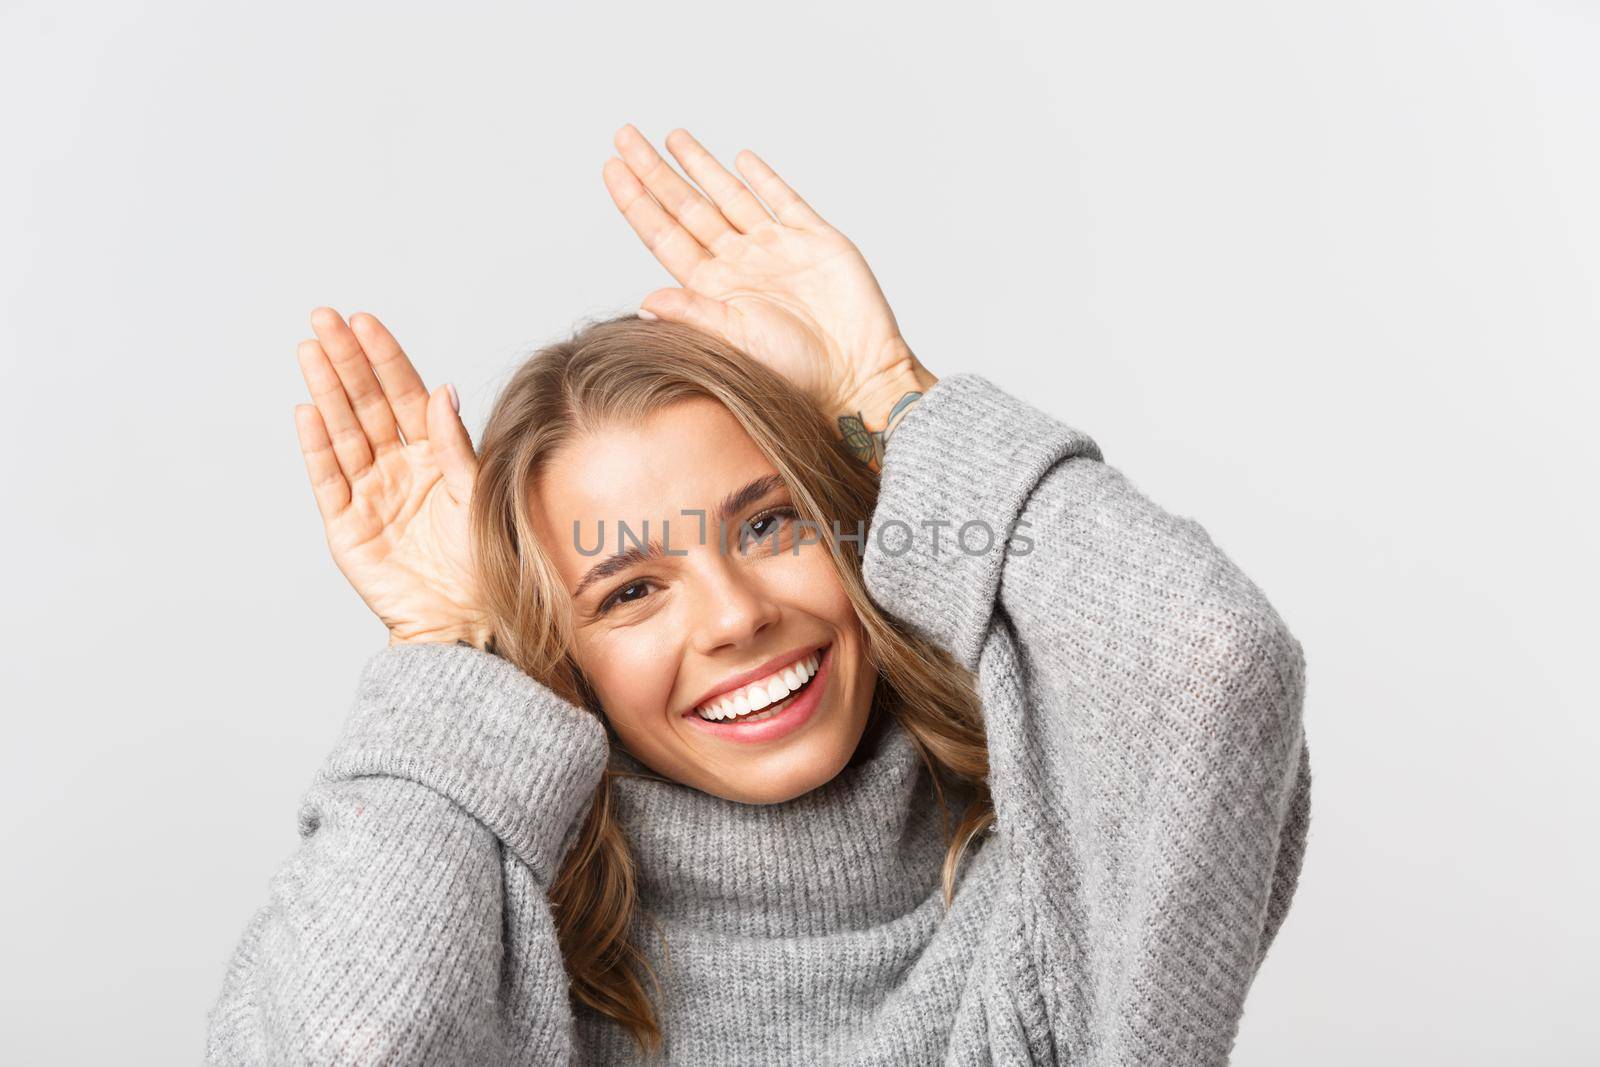 Close-up of lovely blond girl in grey sweater, smiling and showing puppy ears with hands raised over head, standing over white background.